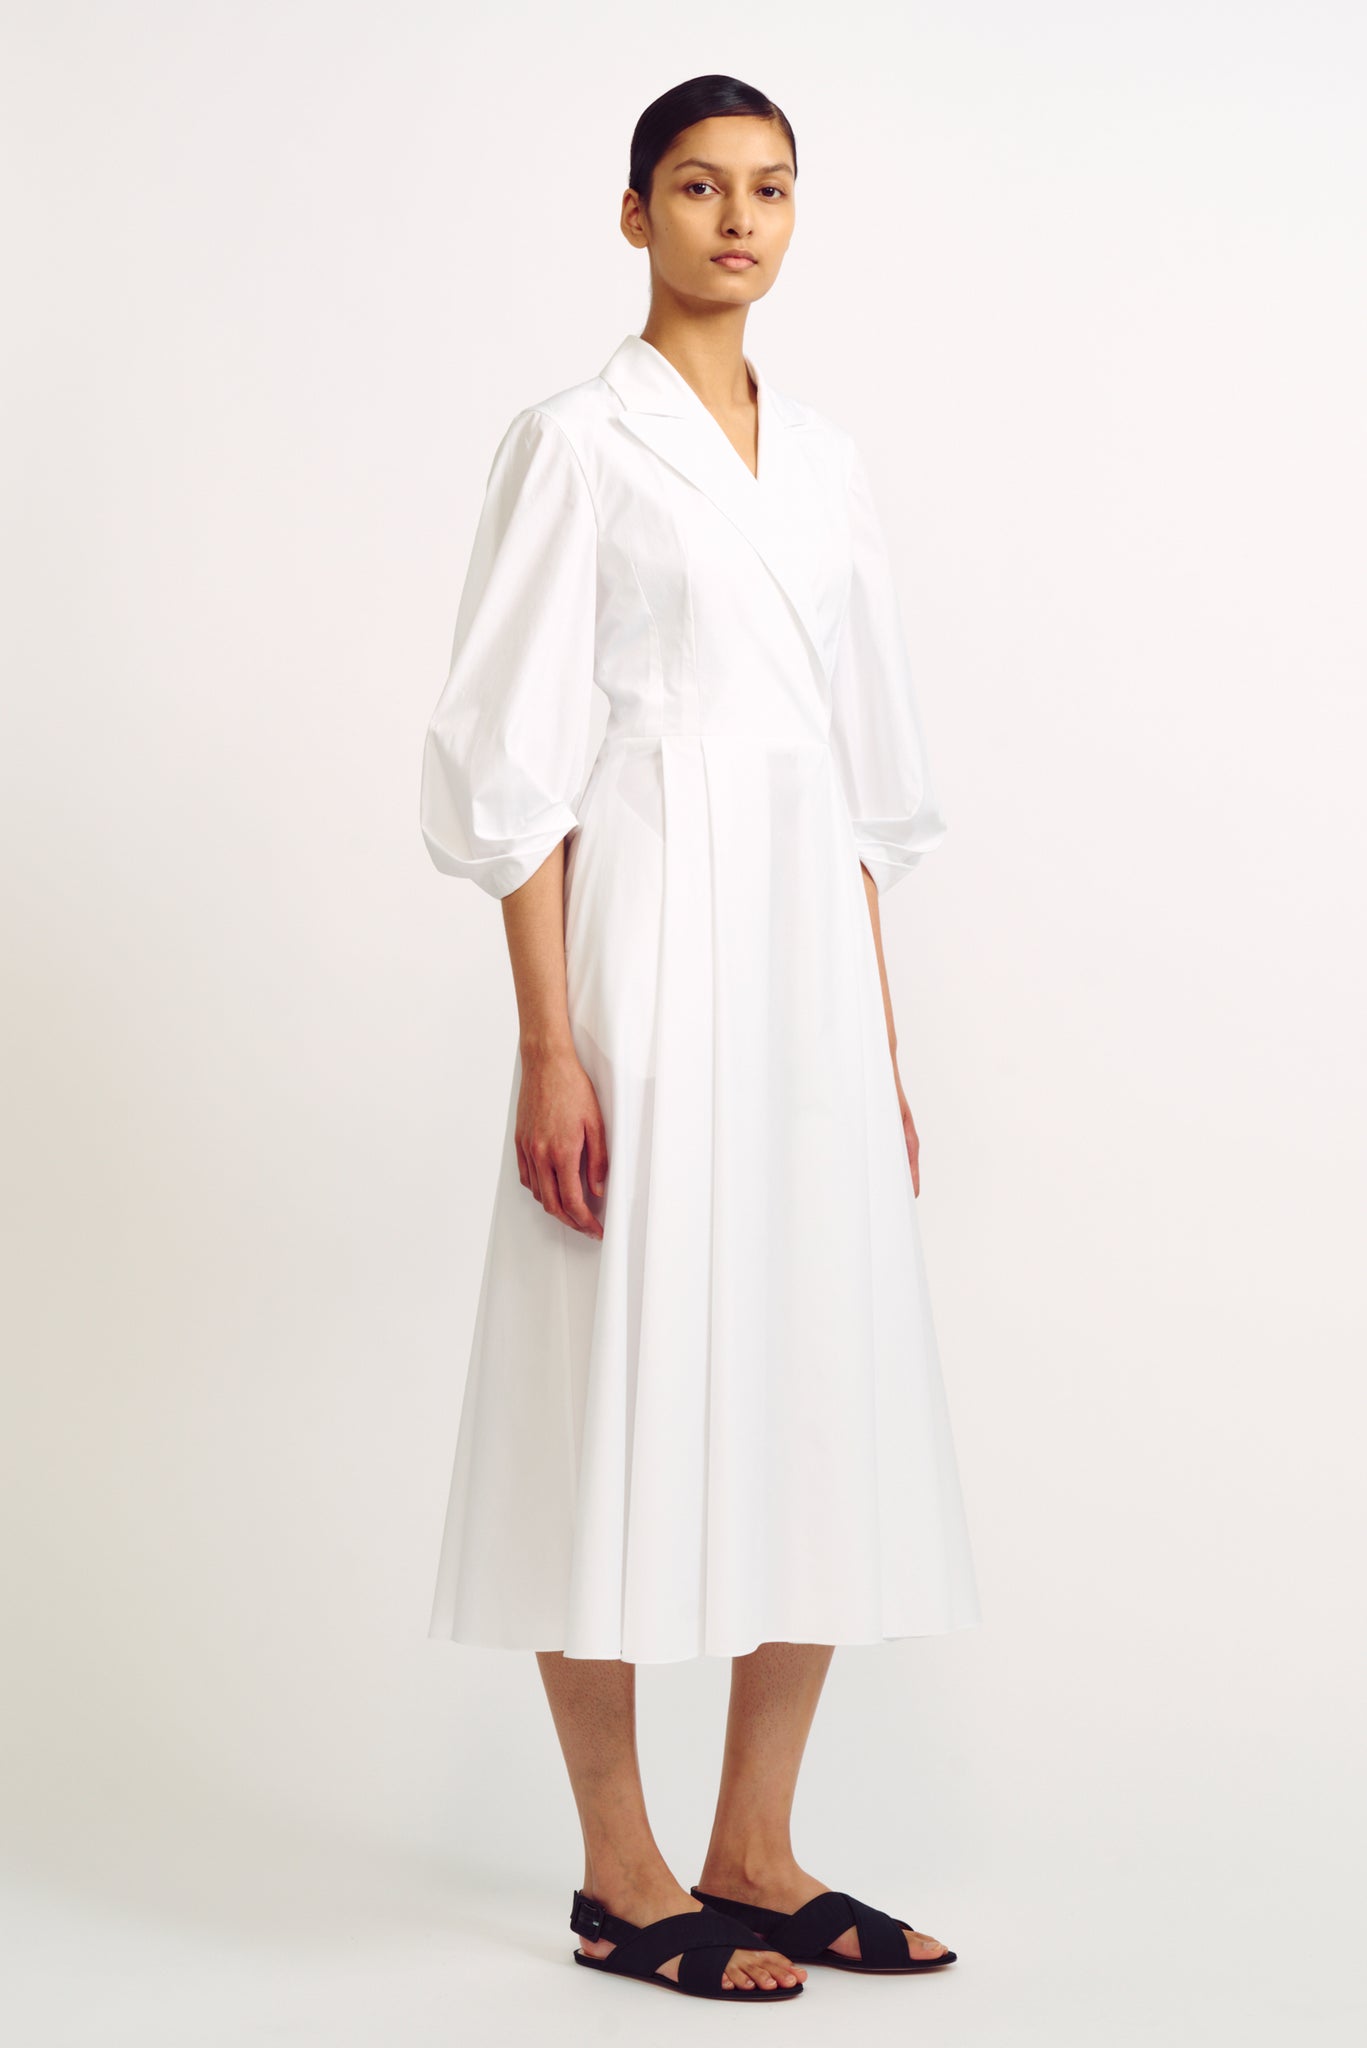 Brittany Dress | White Cotton Long Sleeve Wrap Front Dress | Emilia Wickstead